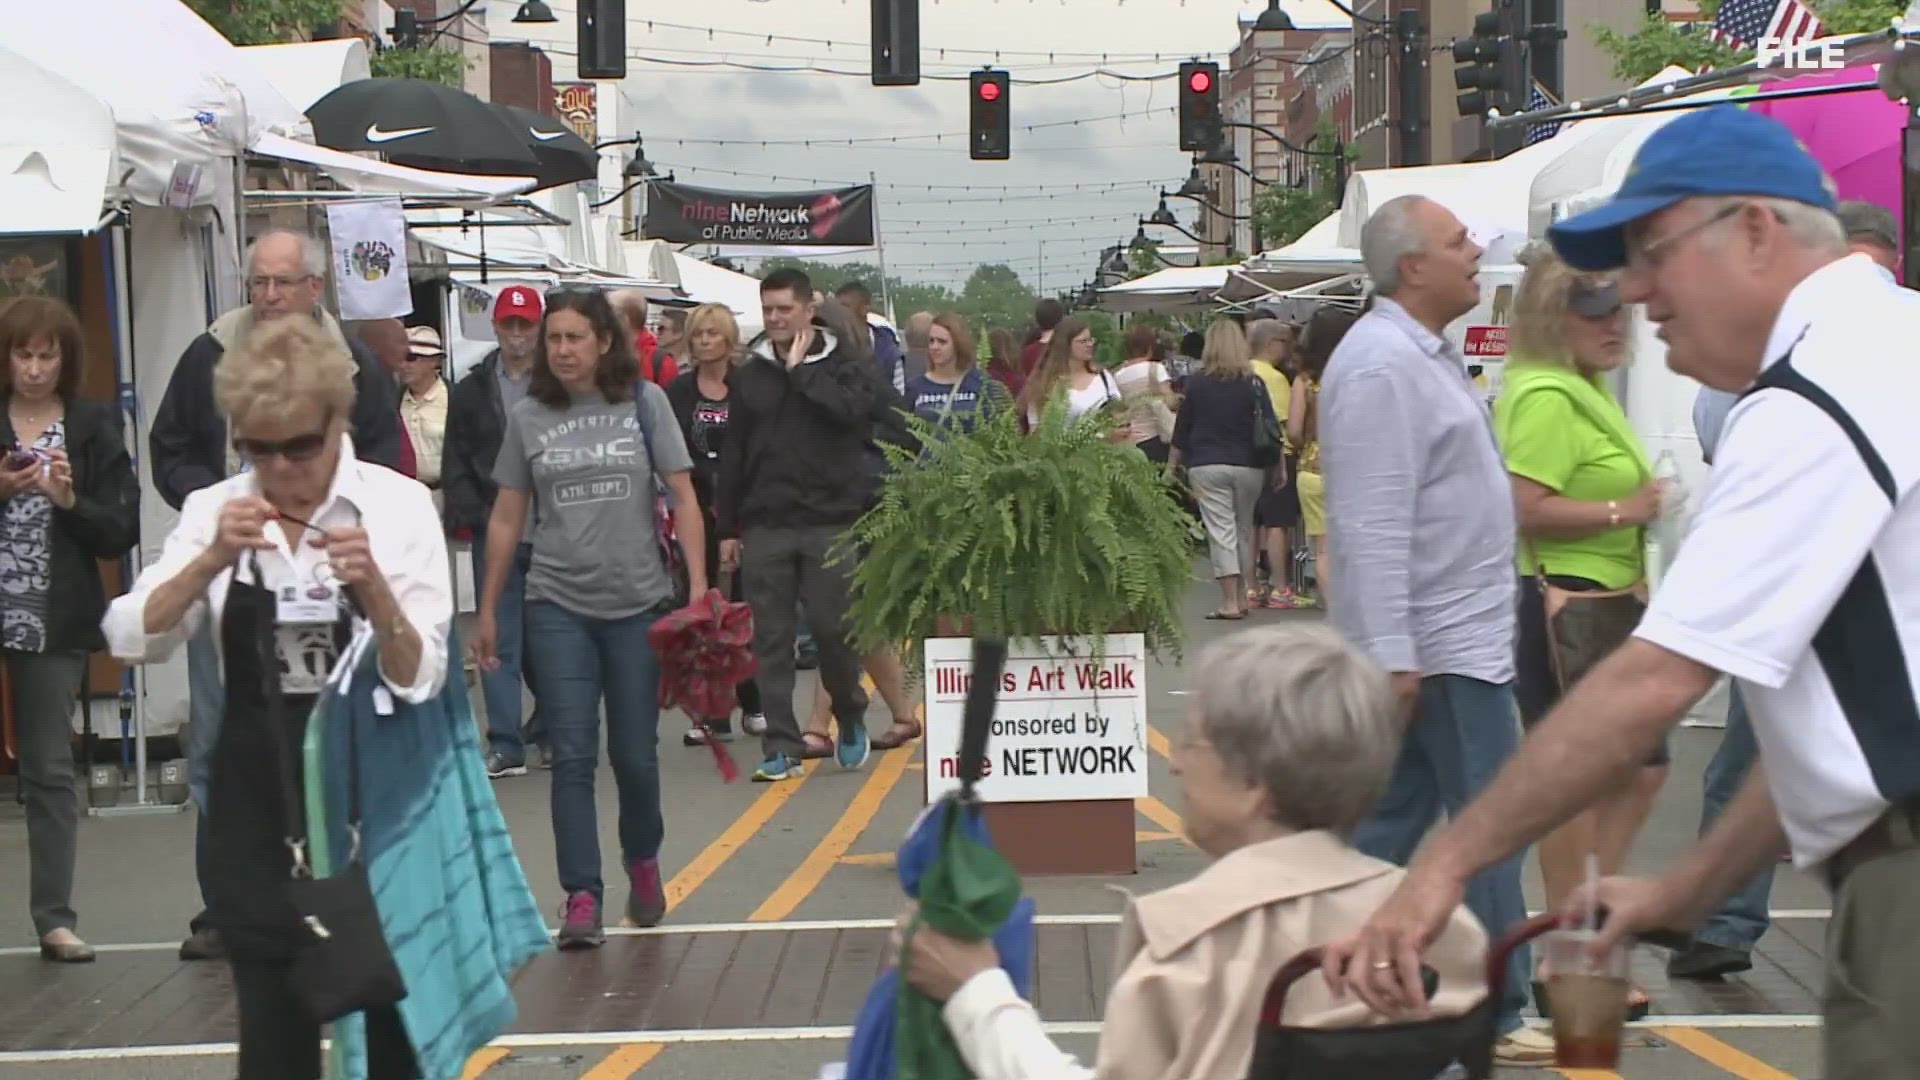 Art on the Square is underway this weekend in Belleville, Illinois. Carol Bartle joined Today in St. Louis on Saturday to talk about the event.